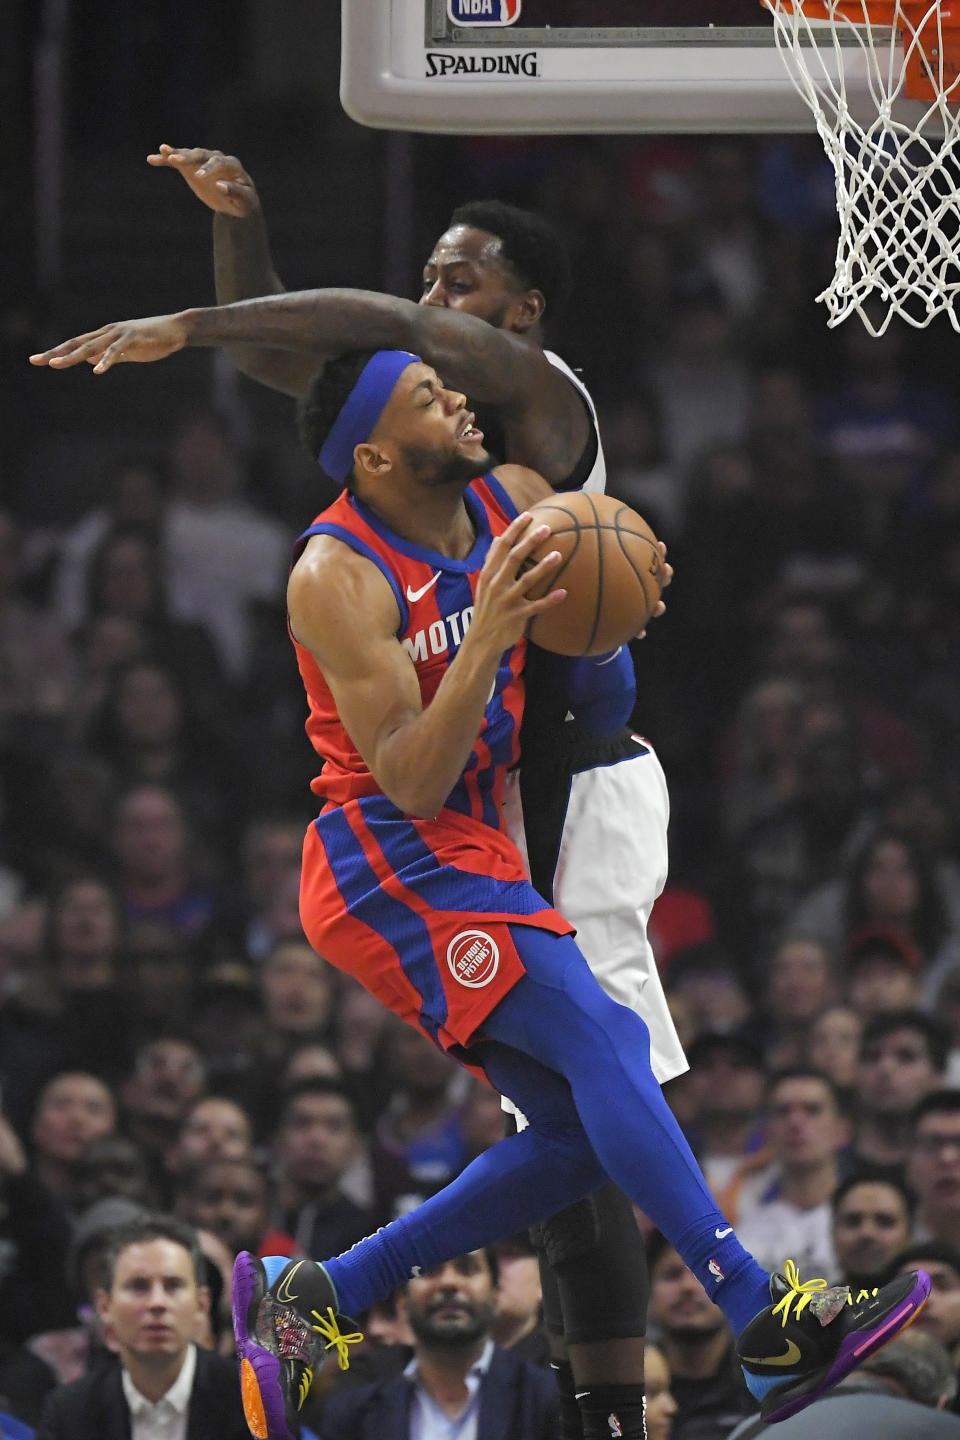 Detroit Pistons guard Bruce Brown, left, shoots as Los Angeles Clippers forward JaMychal Green defends during the first half of an NBA basketball game Thursday, Jan. 2, 2020, in Los Angeles. (AP Photo/Mark J. Terrill)